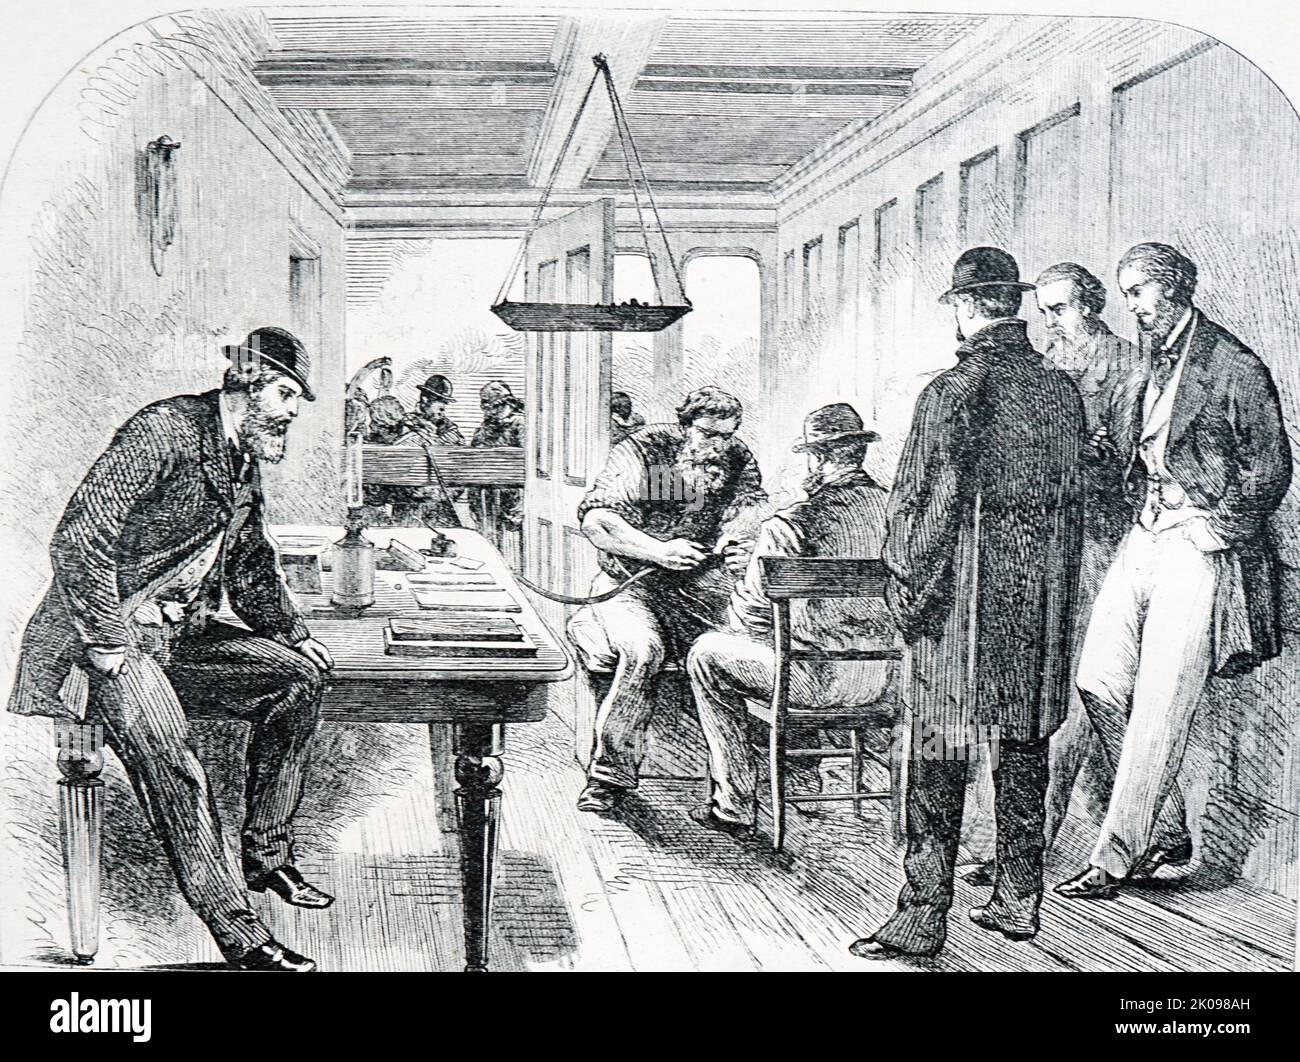 Illustration showing the laying of the Atlantic Telegraph Cable. In 1866, the British ship Great Eastern succeeded in laying the first permanent telegraph line across the Atlantic Ocean. Transatlantic telegraph cables were undersea cables running under the Atlantic Ocean for telegraph communications. Stock Photo